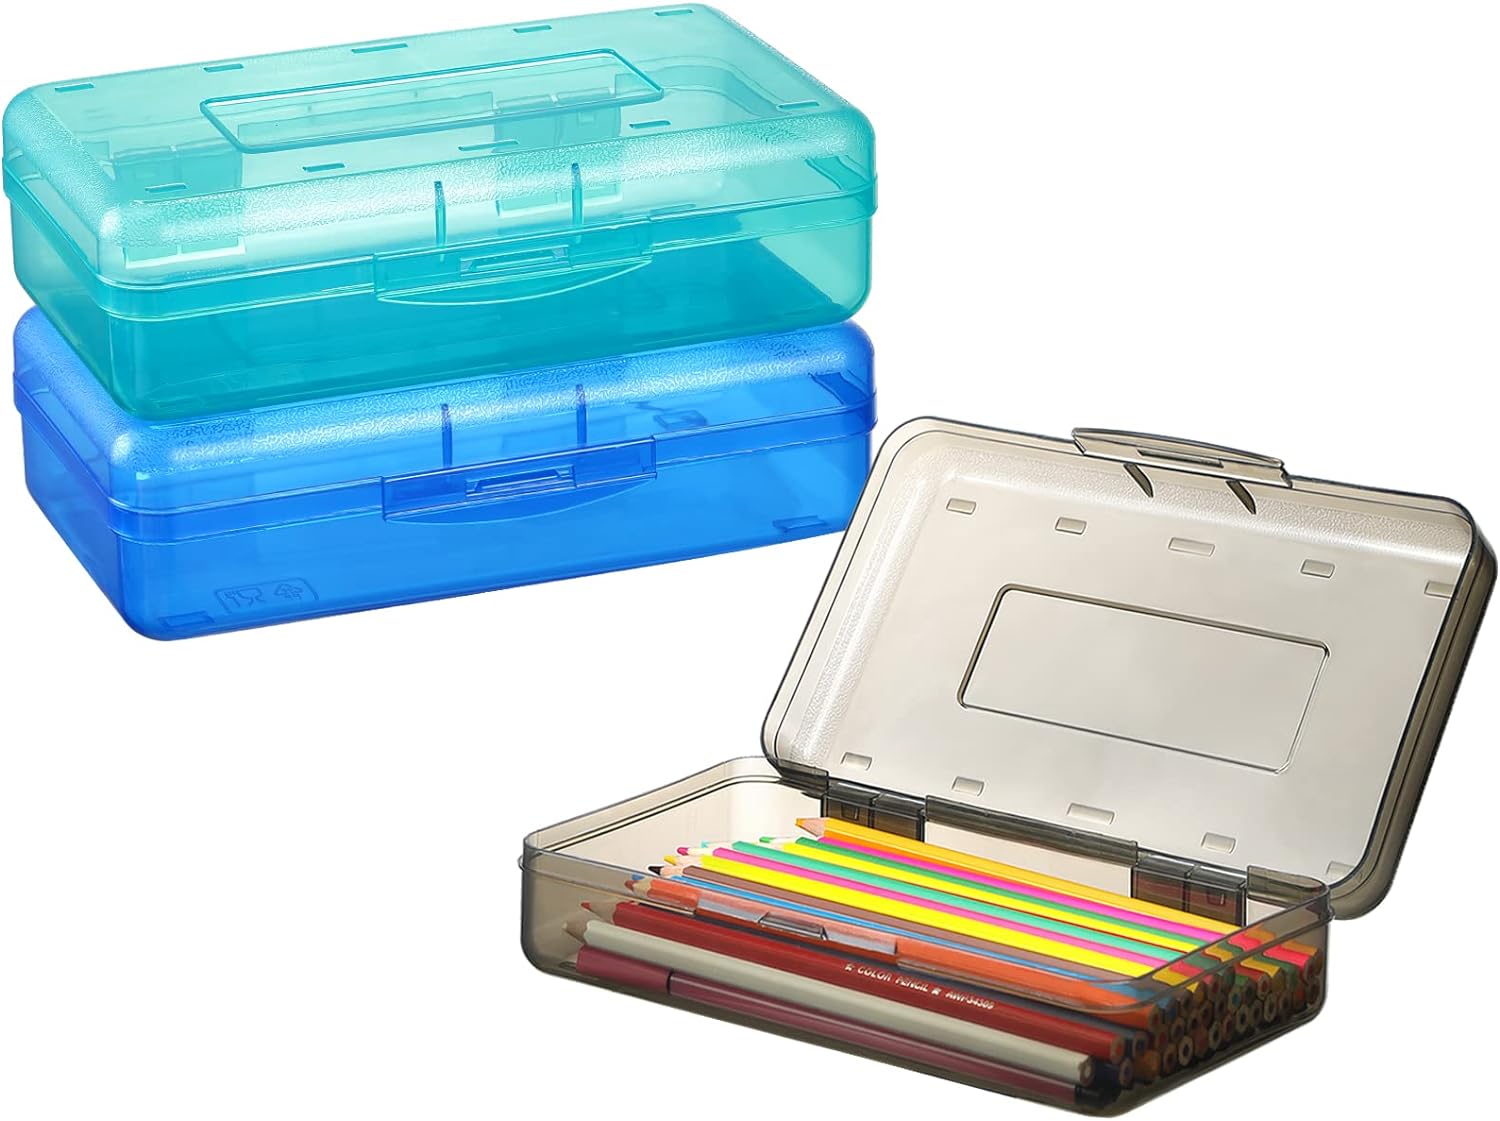 Sooez 3pcs Pencil Box, Plastic School Supply Box, Large Storage Box, Stackable Clear Design for Kids, 8.2x4.6x2.3 inches